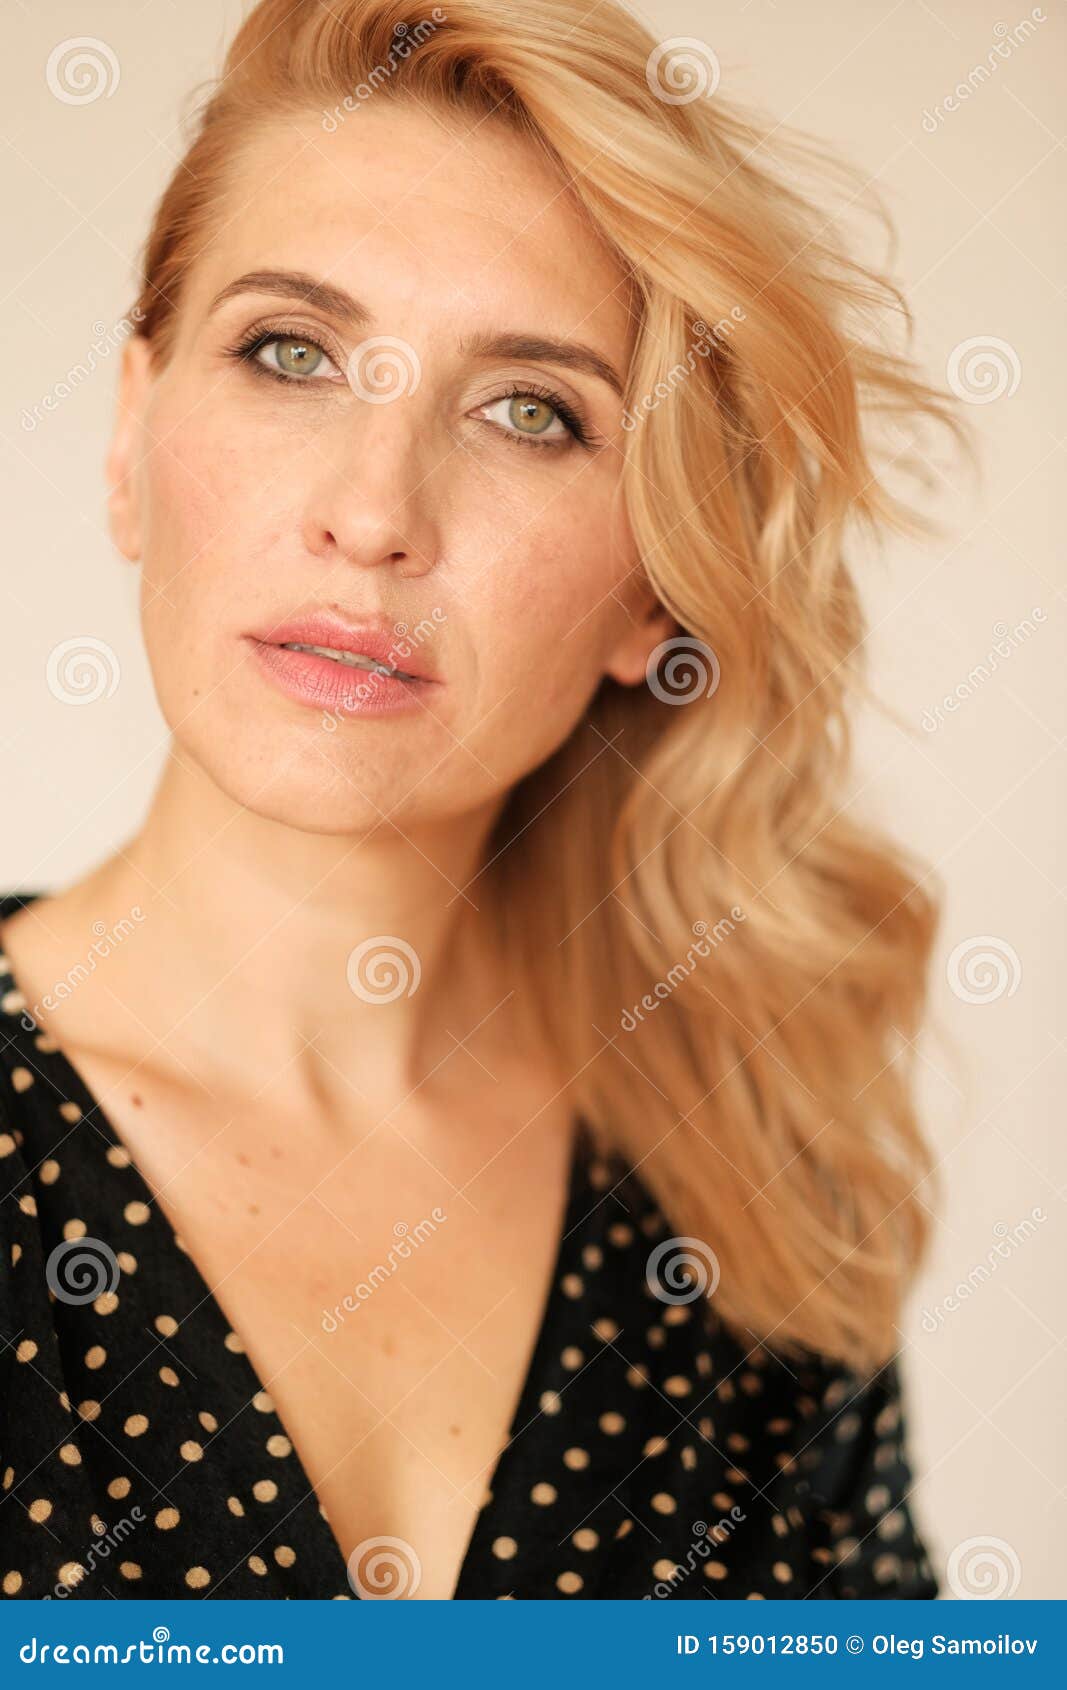 Close Up Portrait Of A Beautiful Adult Woman 35 45 Years Old With Blond Hair In A Black Dress